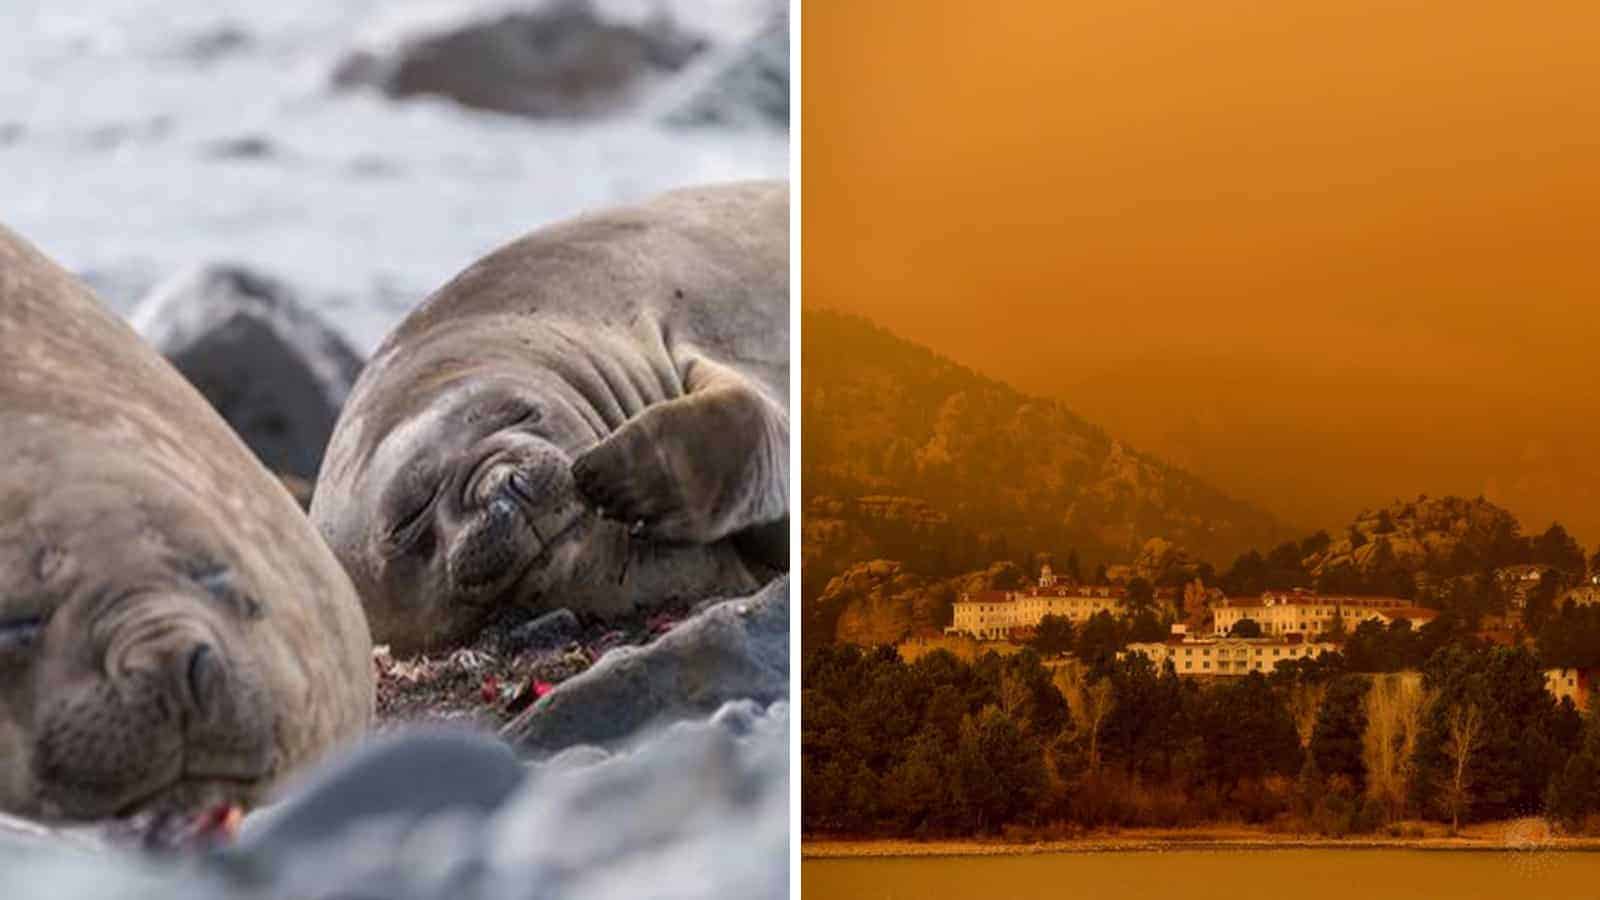 20 Photos That Perfectly Capture the Seriousness of Climate Change